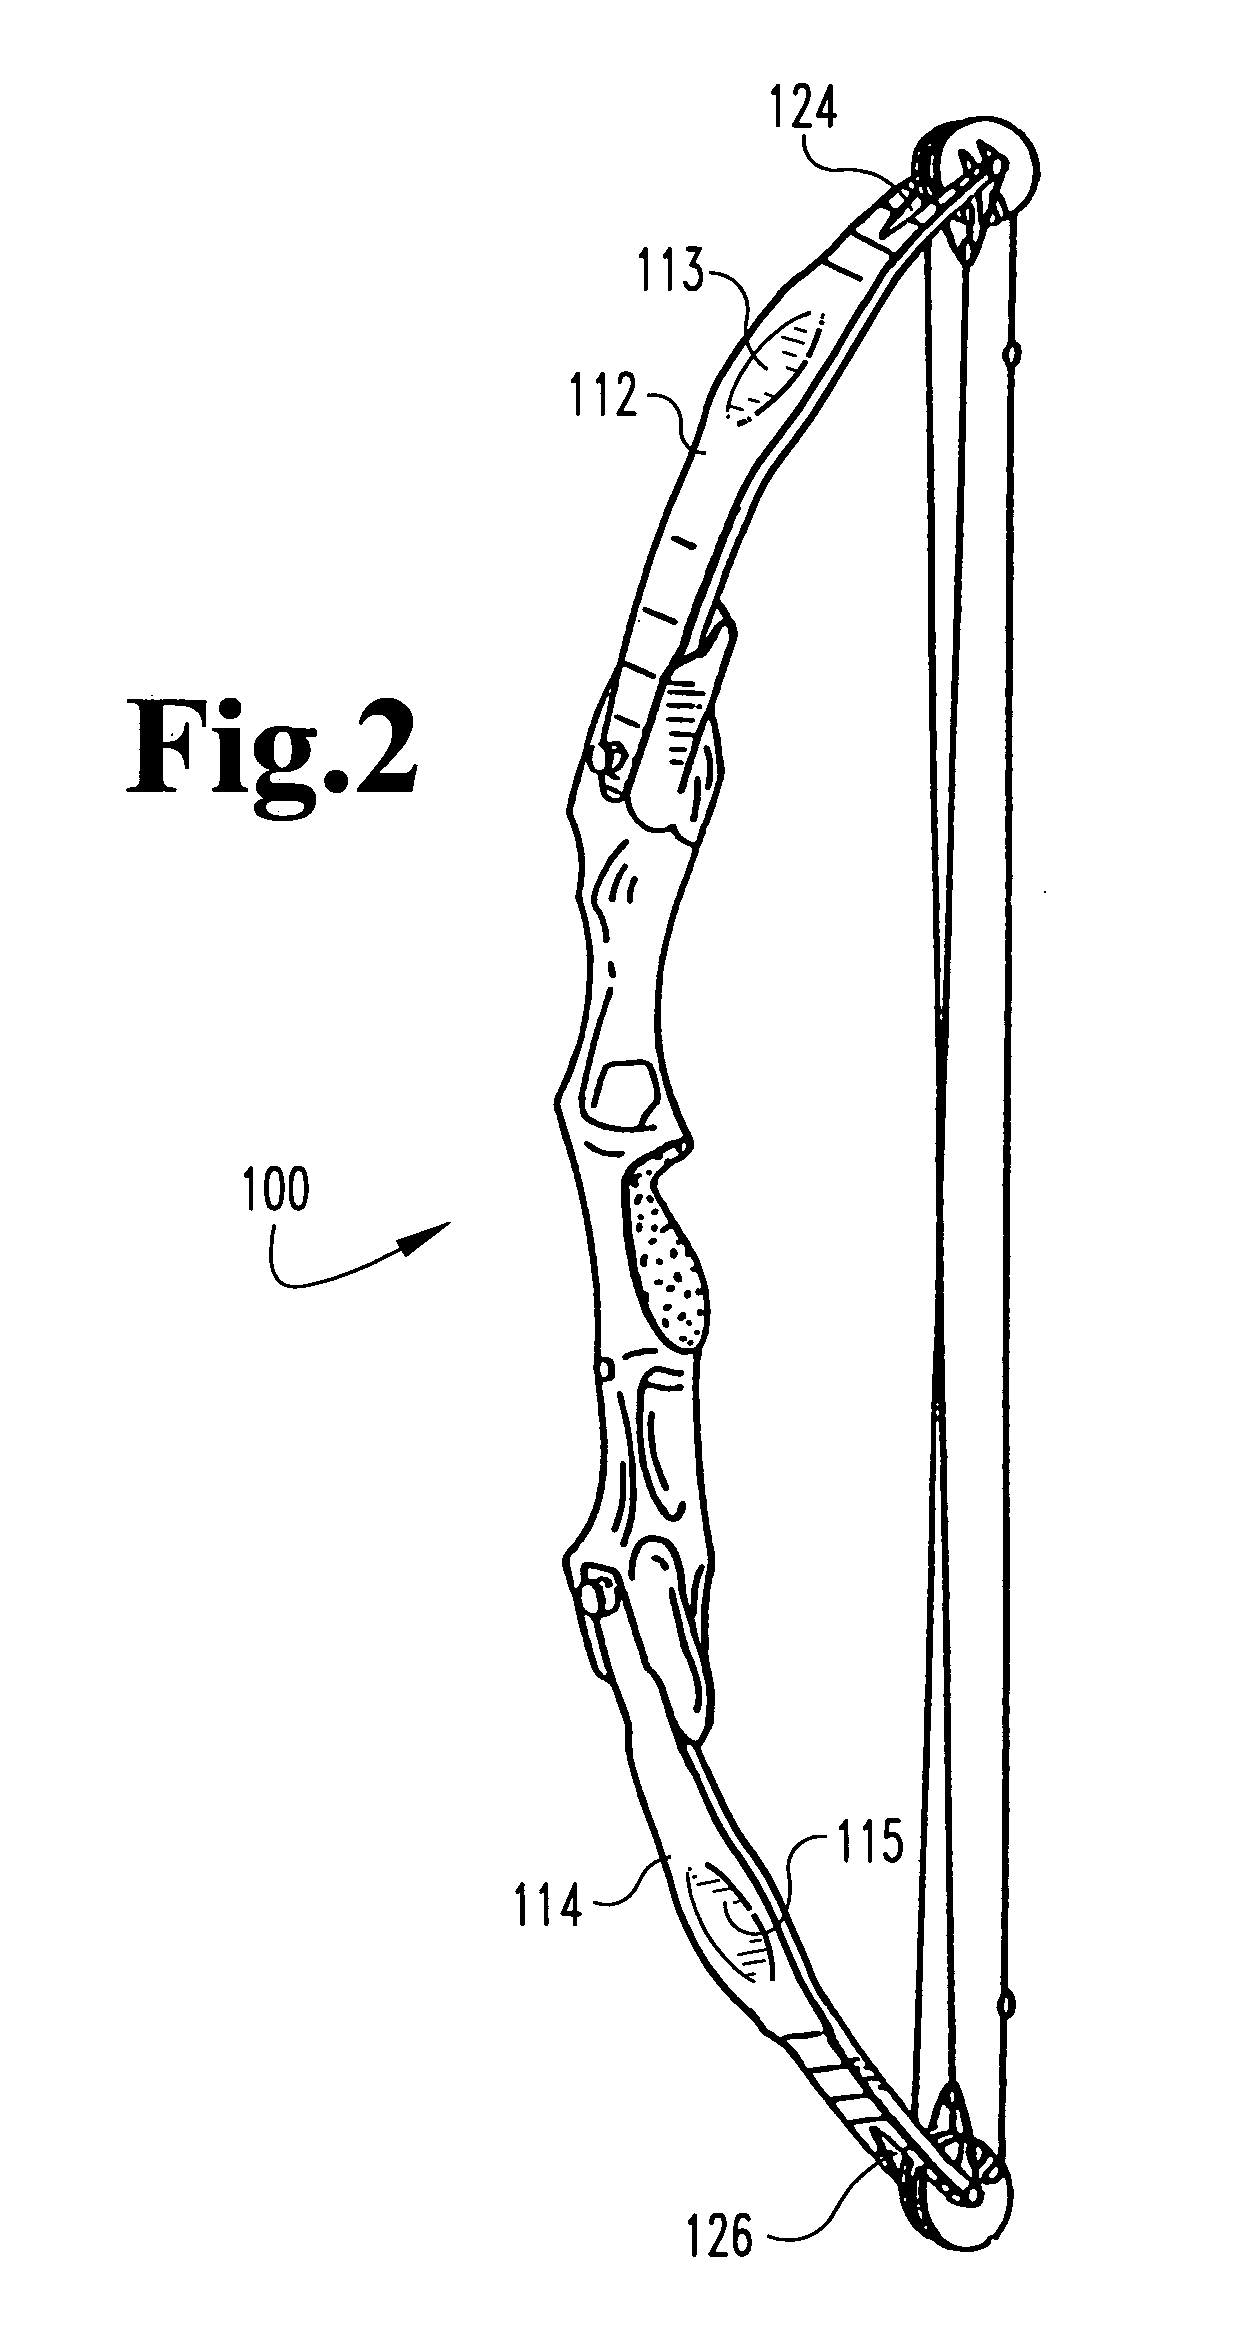 Method for manufacturing ribbed archery bow limb portions and the ribbed archery bow limb portions produced thereby